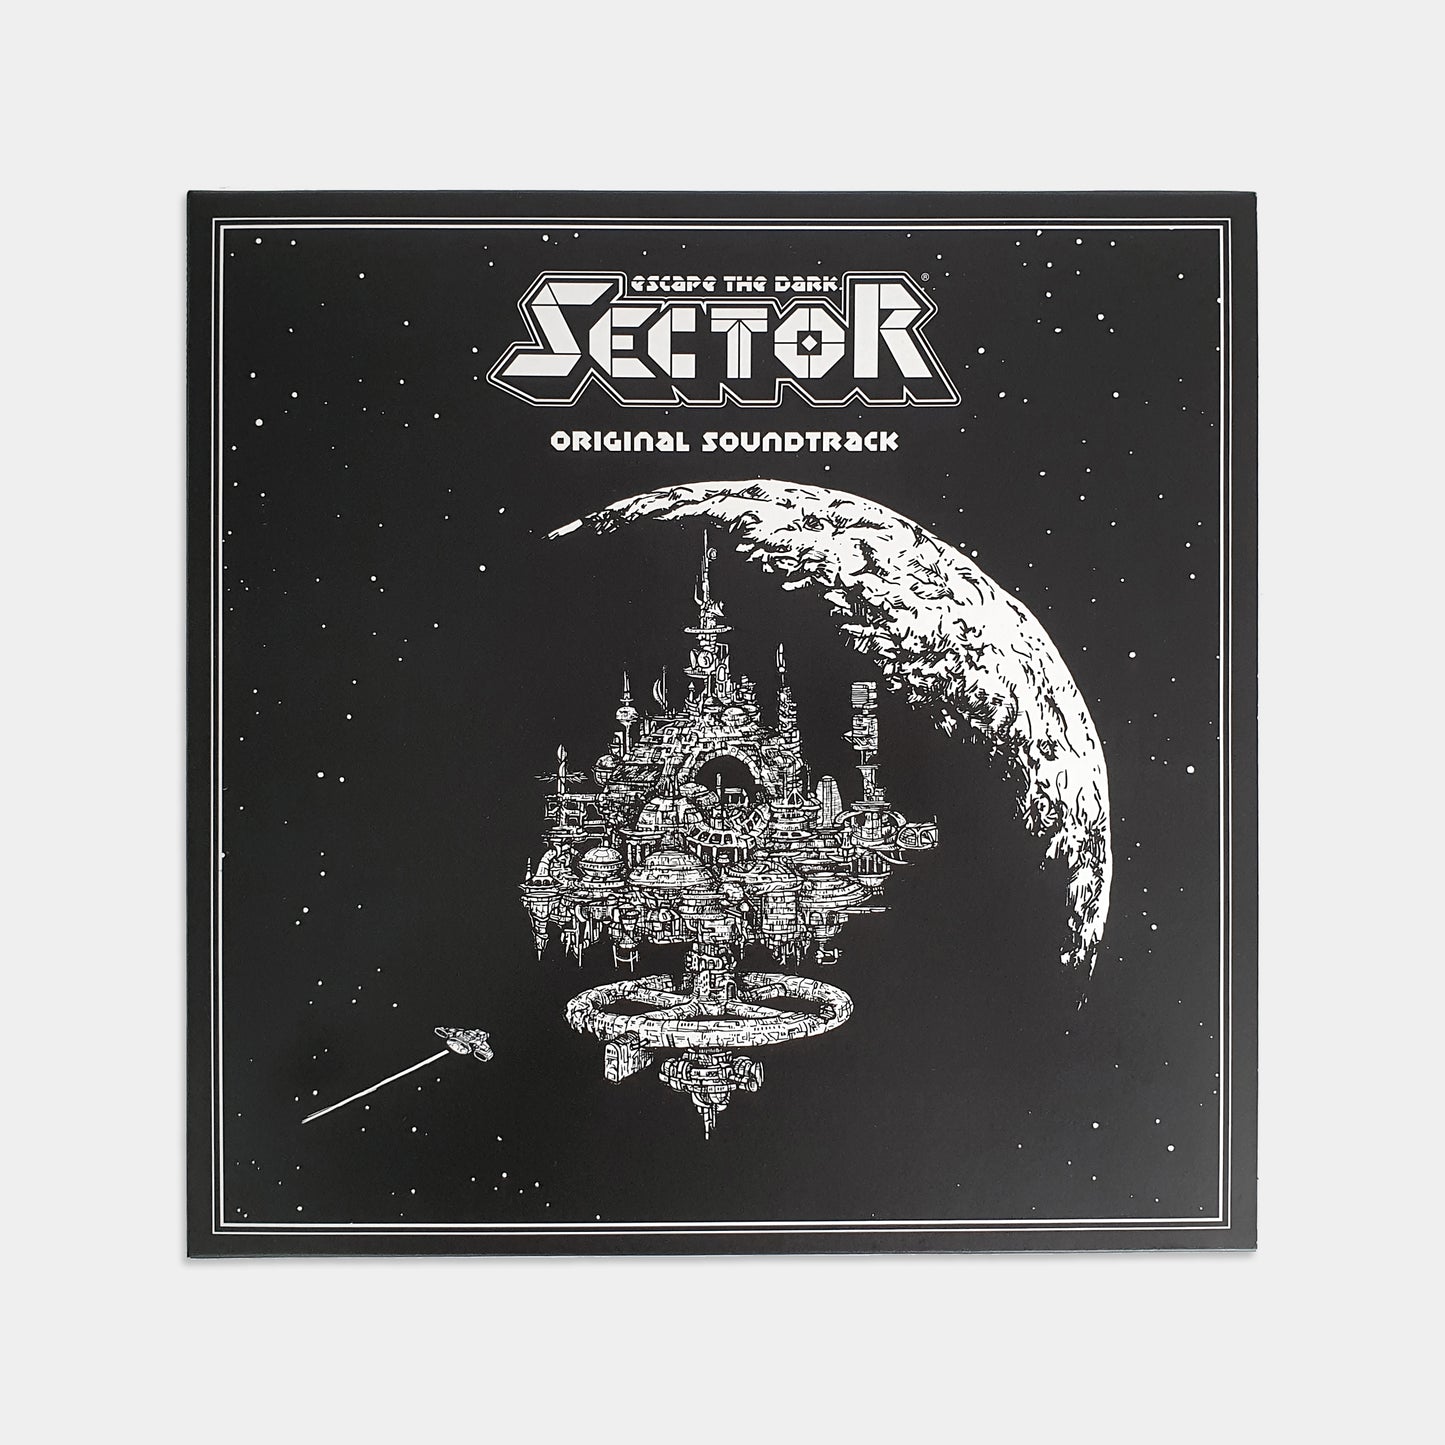 Sector Soundtrack on Vinyl - LIMITED EDITION